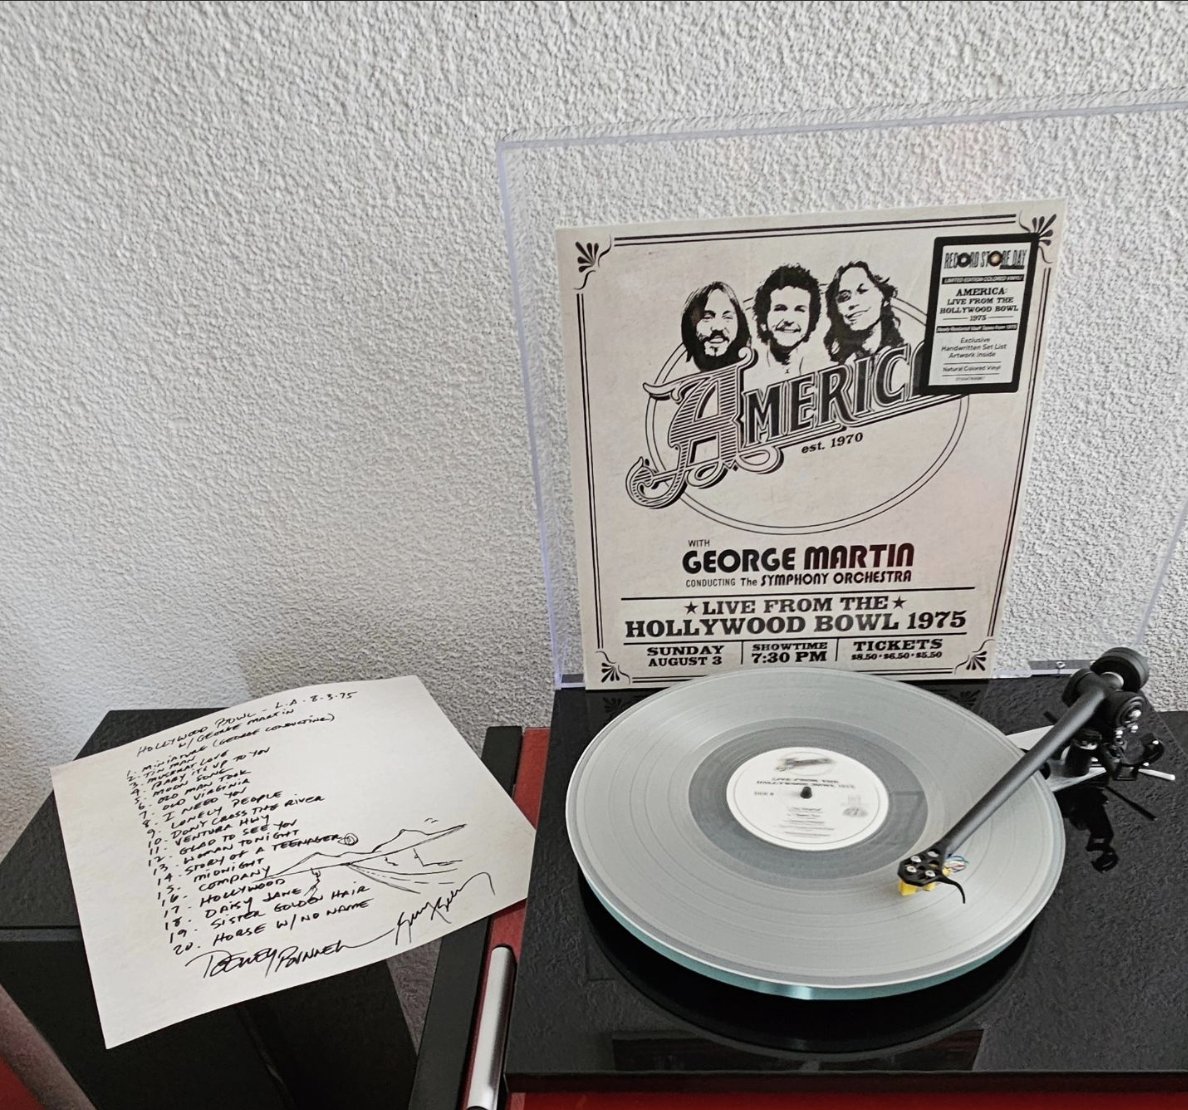 #FanFriday Thanks for showing off your brand-new vinyl, elicat55!